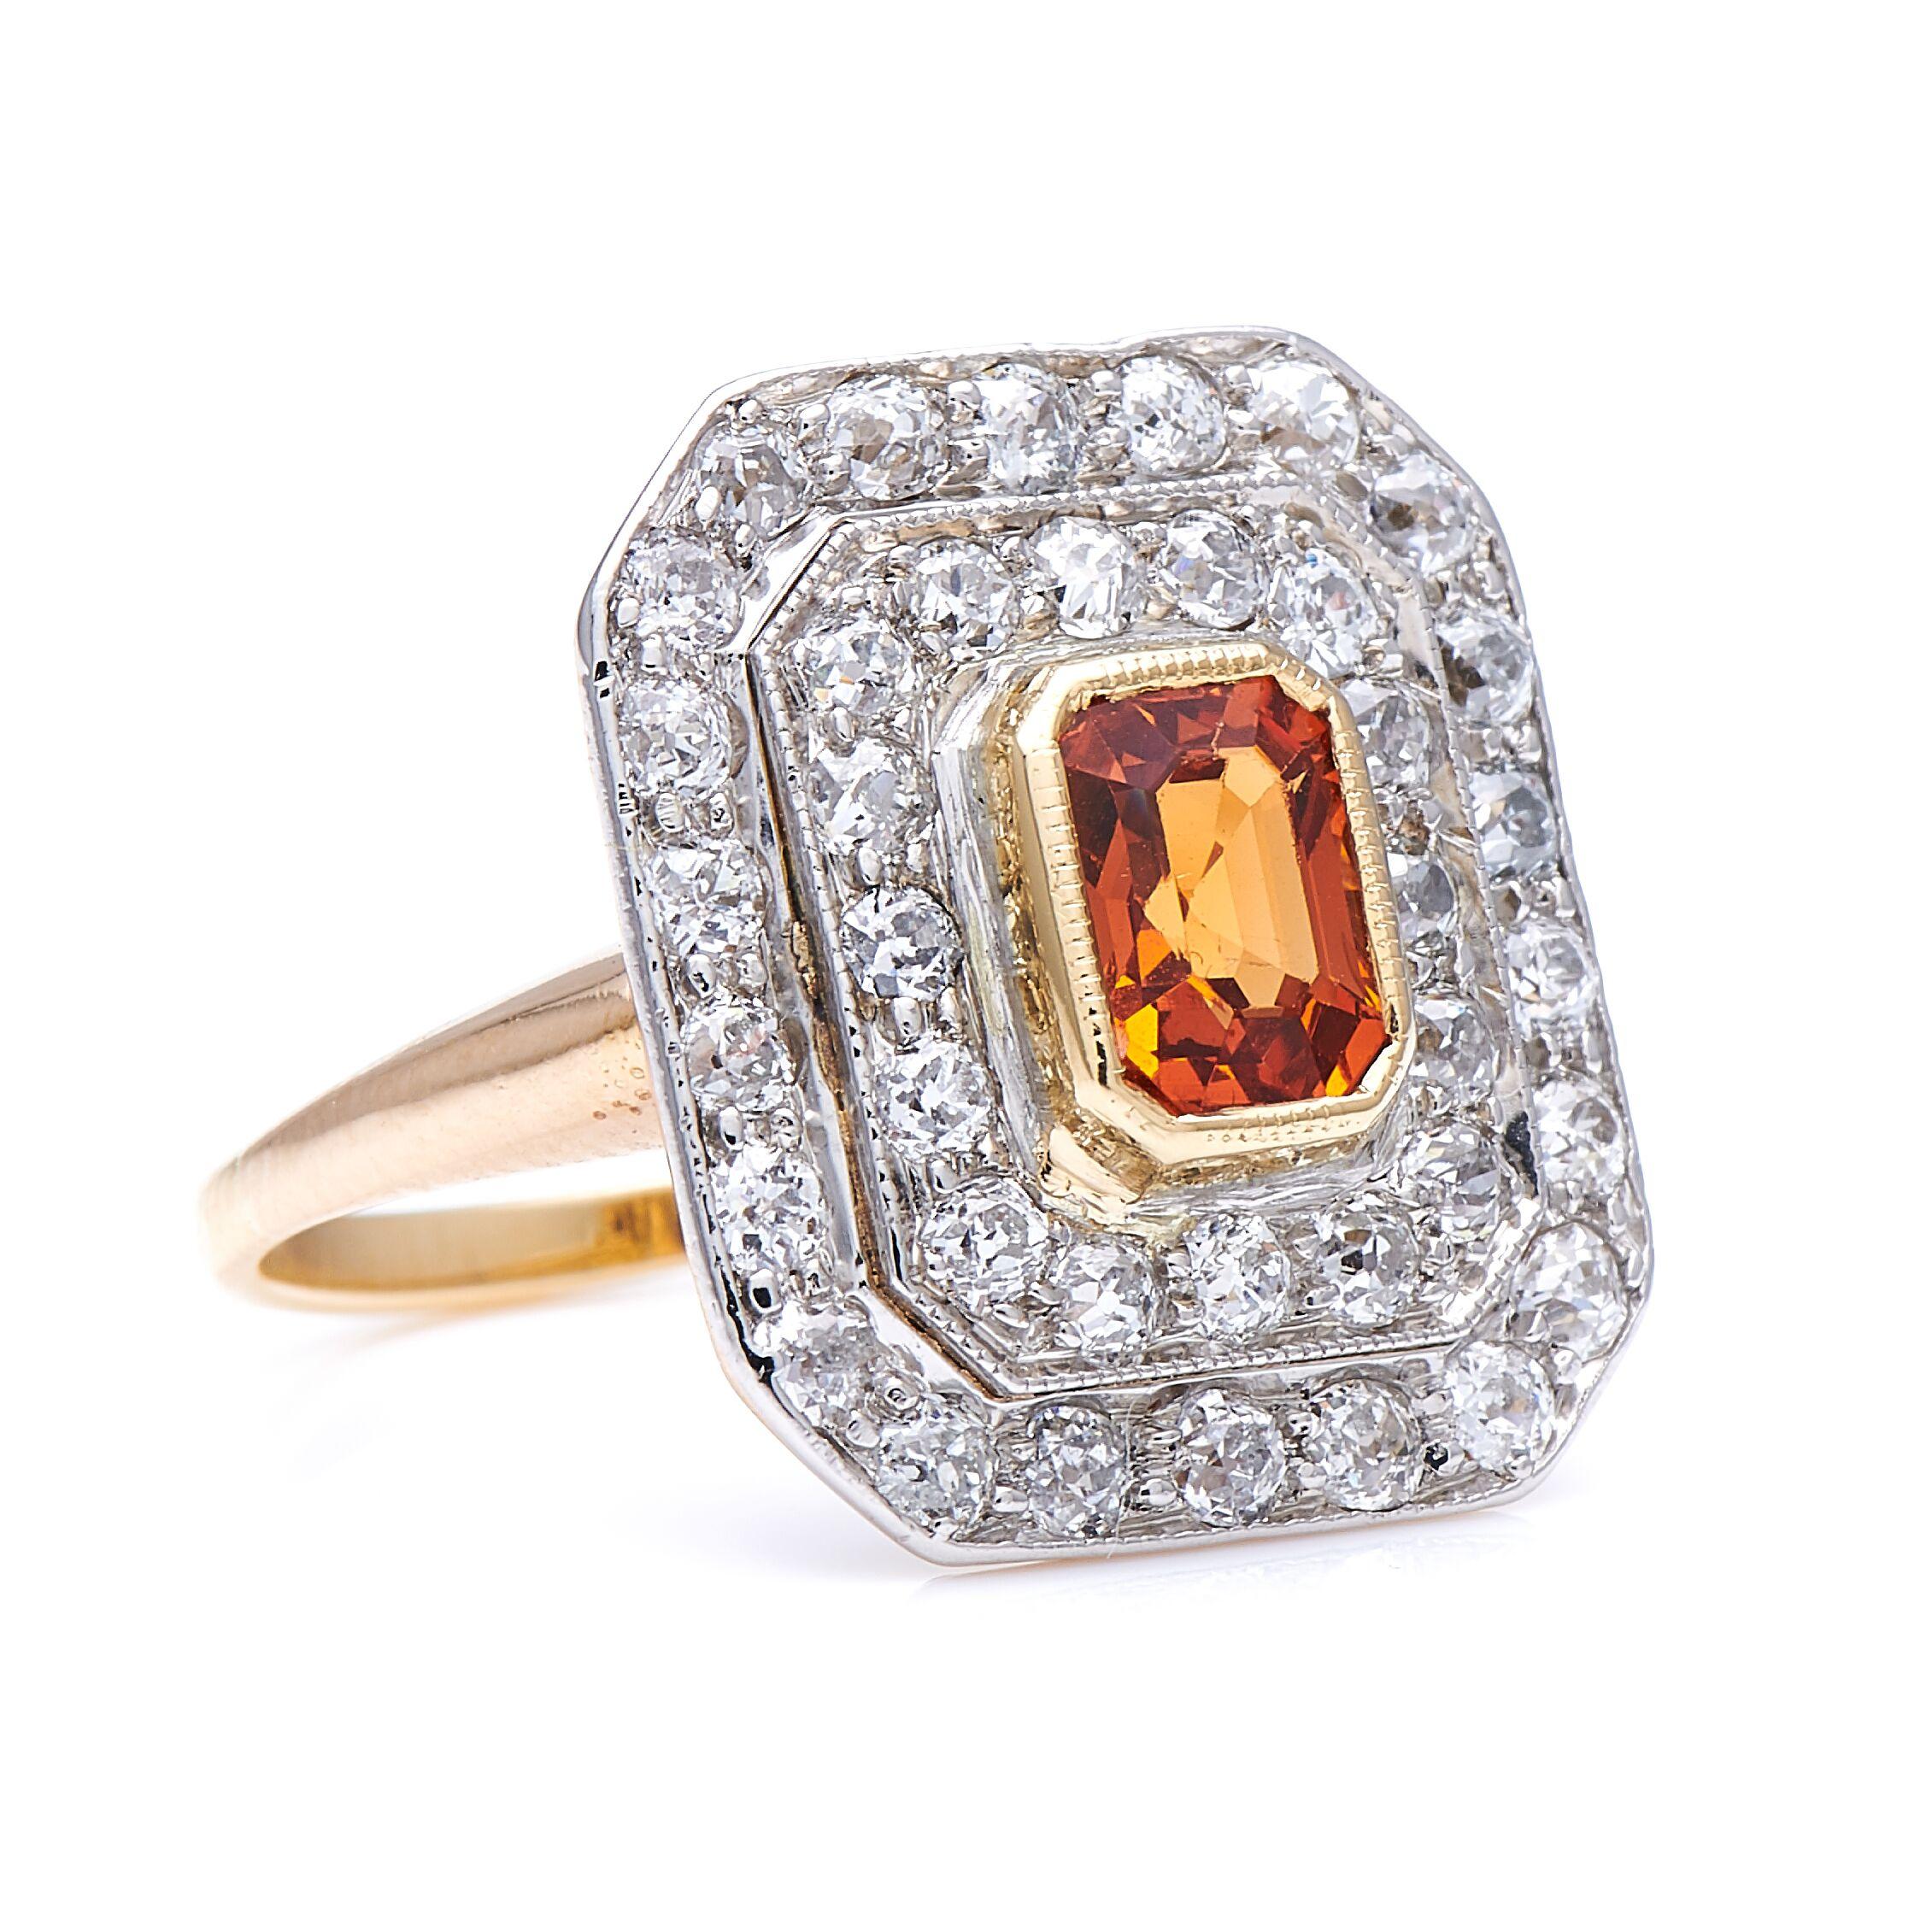 Garnet and diamond ring. This cut-cornered rectangular cluster echoes the cut of the central orange stone, which is a variety of garnet known as Spessartine or ‘Mandarin’ garnet, and is the only member of the garnet family to display this striking